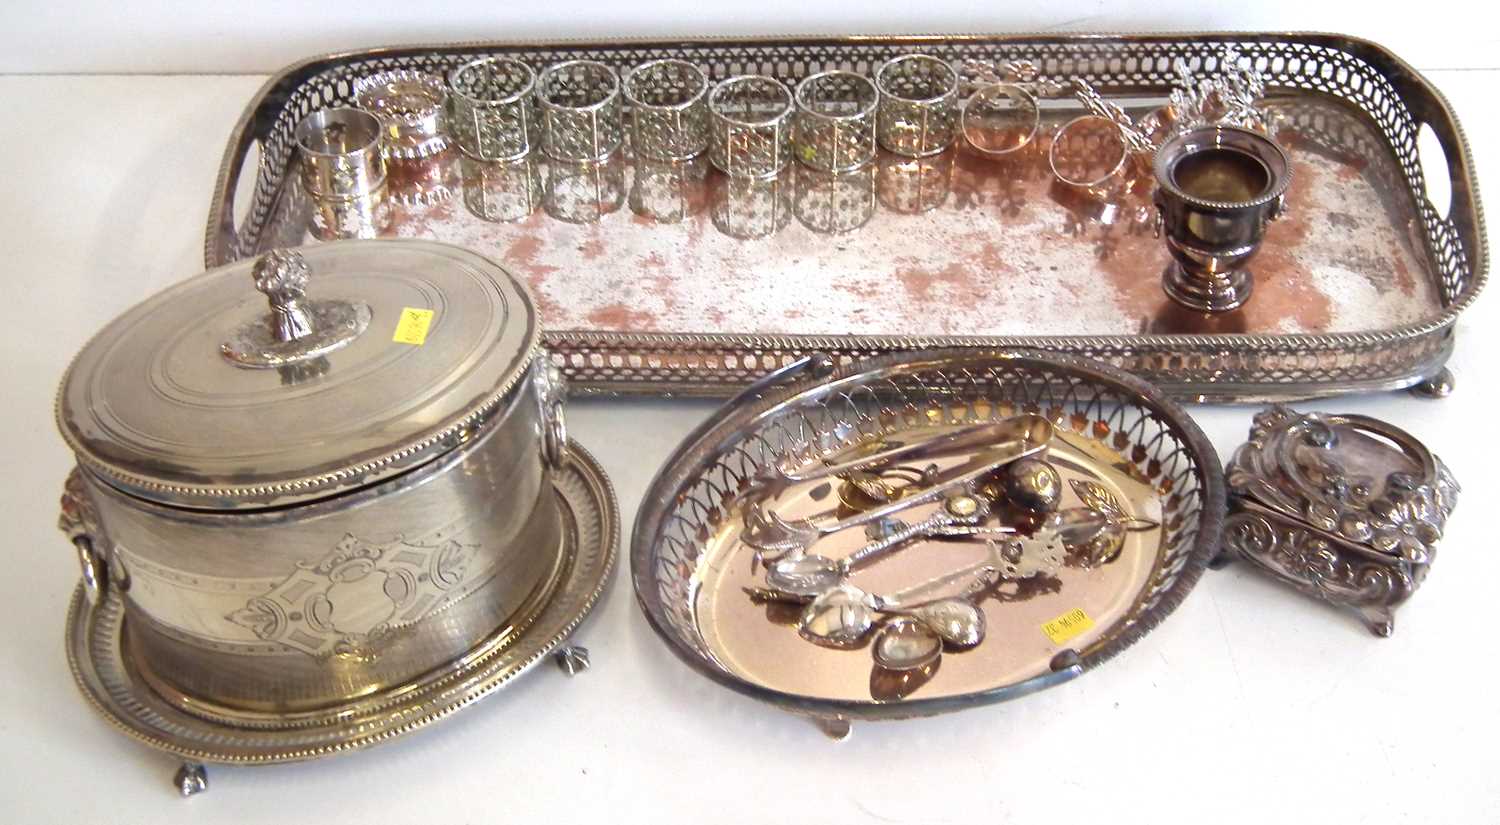 Oval silver plated biscuit container, Sheffield plated tray and other plated ware.